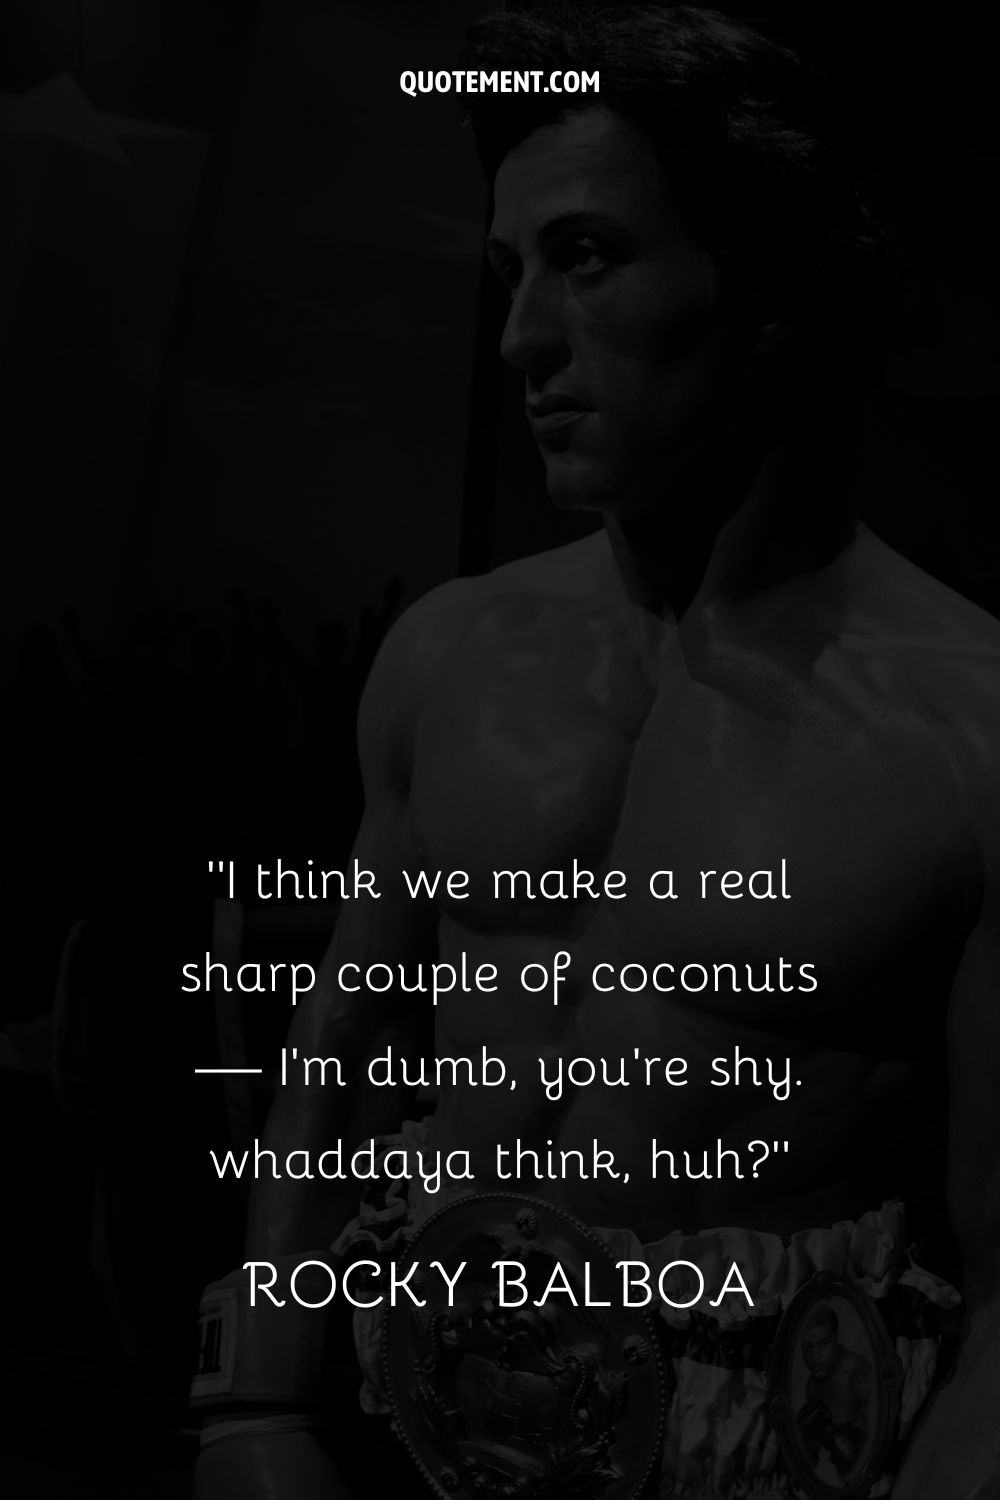 image of boxer Stalone representing famous quote from Rocky
